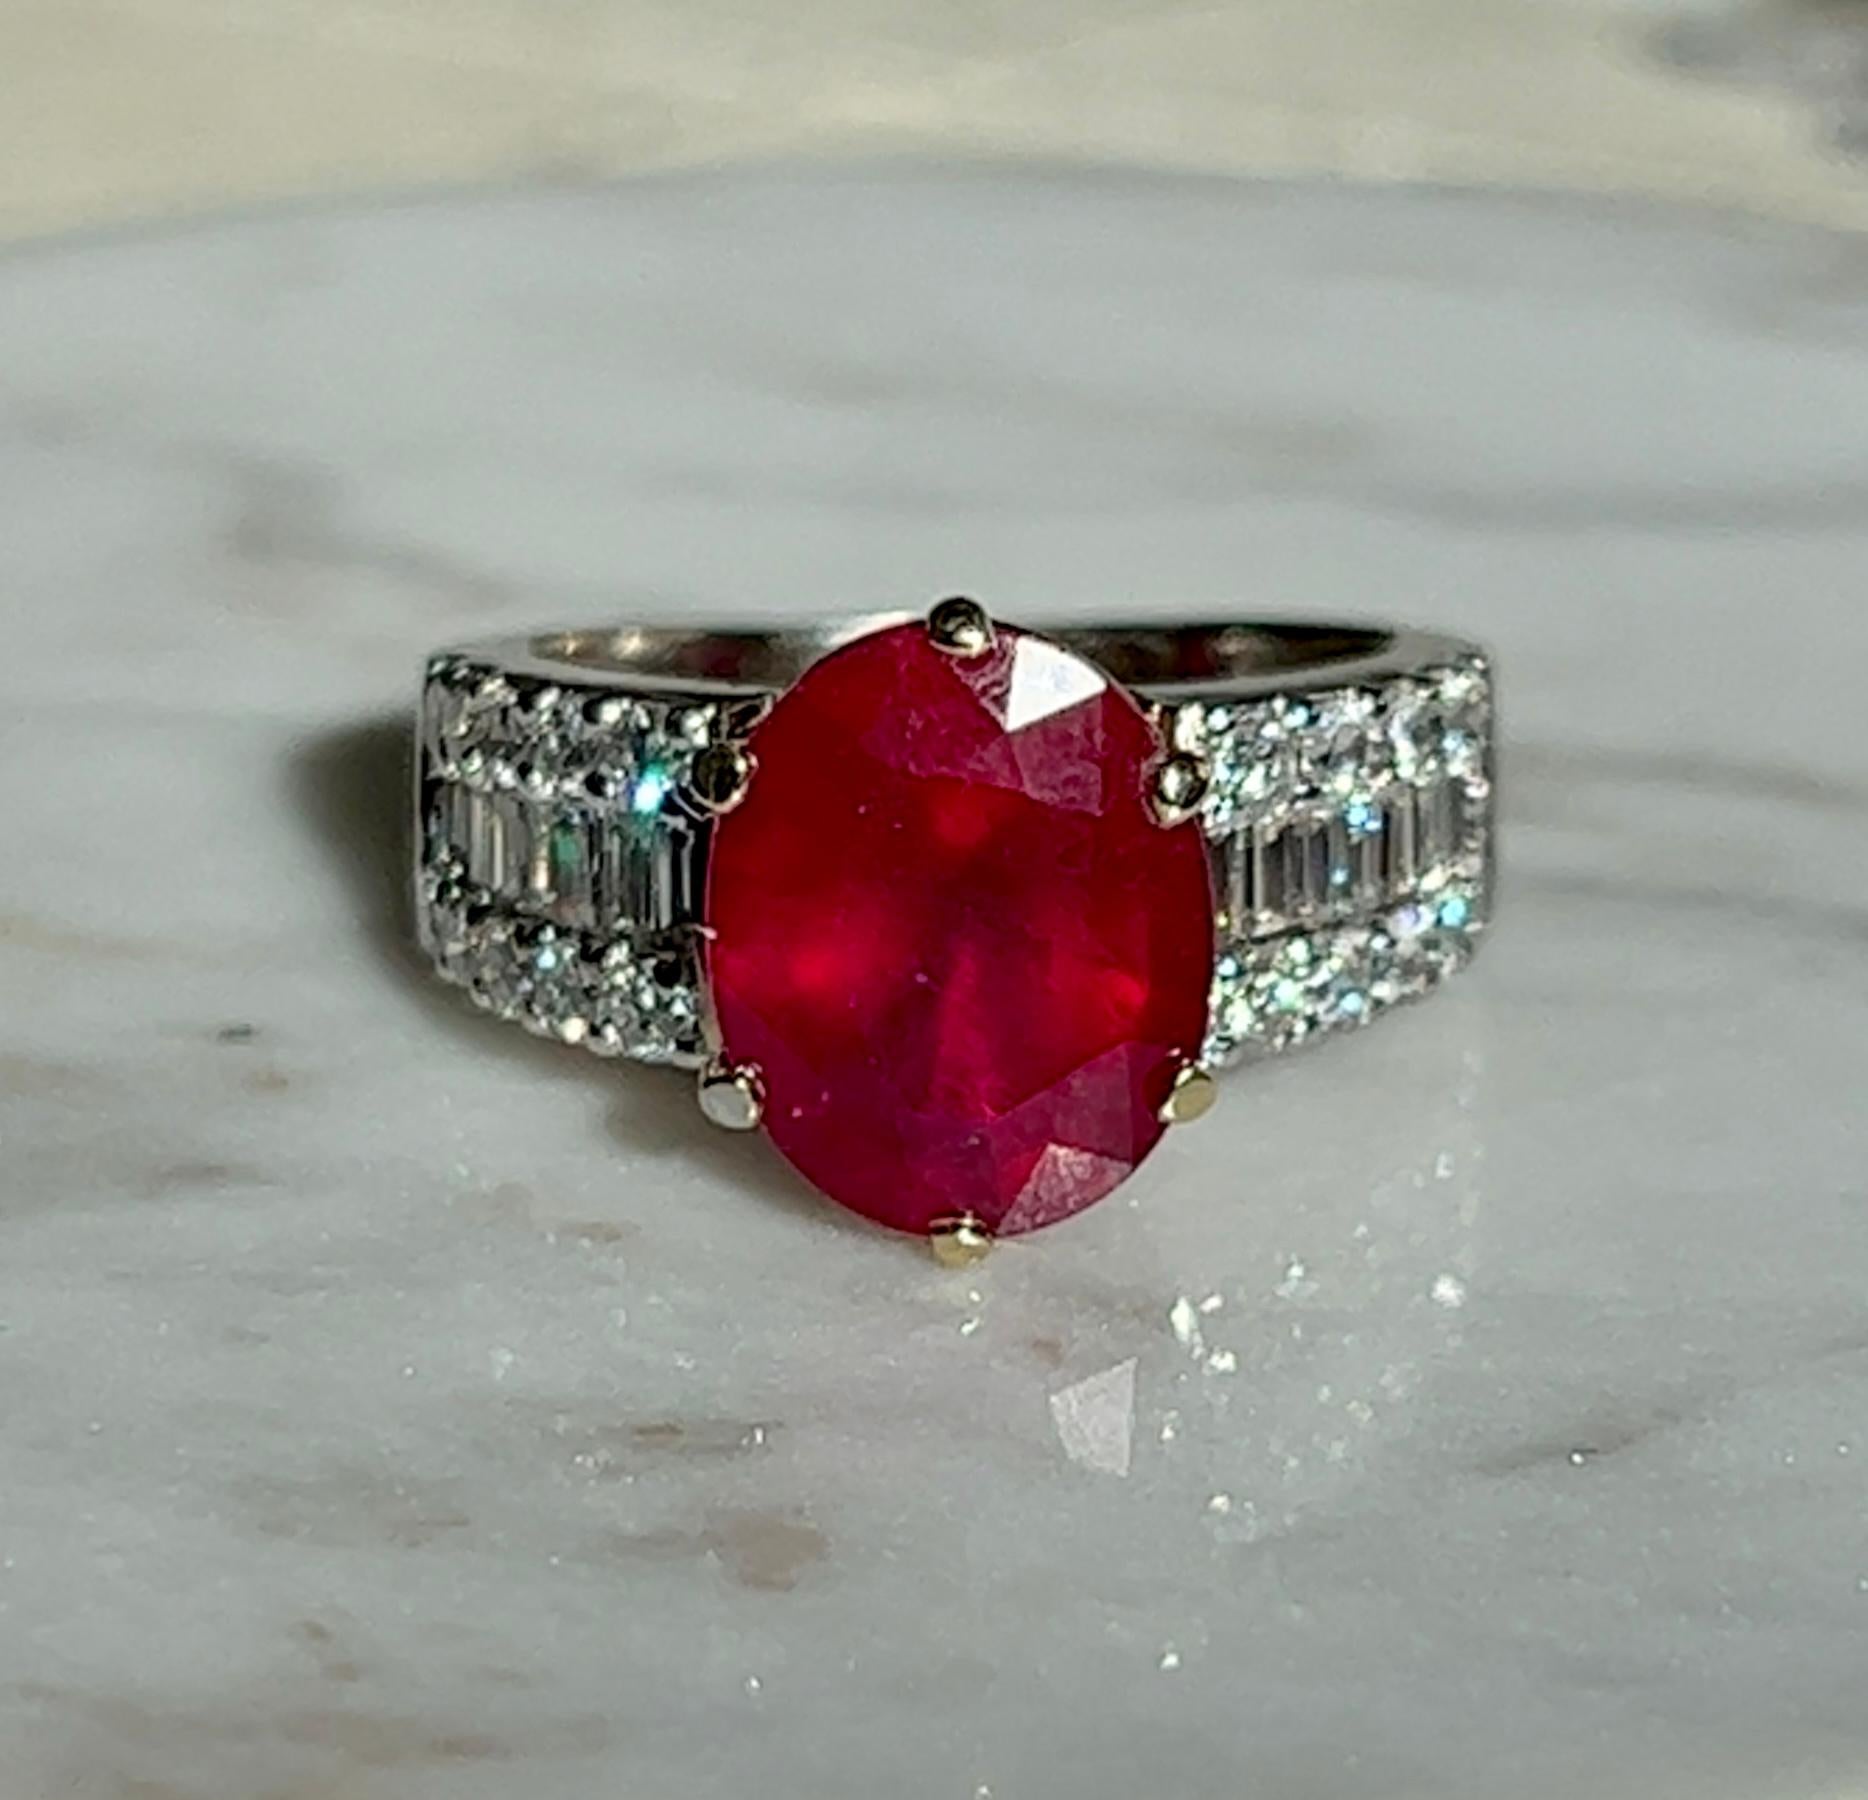 Oval 5.71 Carat Natural Ruby & Diamond Ring in 18K Gold In Good Condition For Sale In Towson, MD